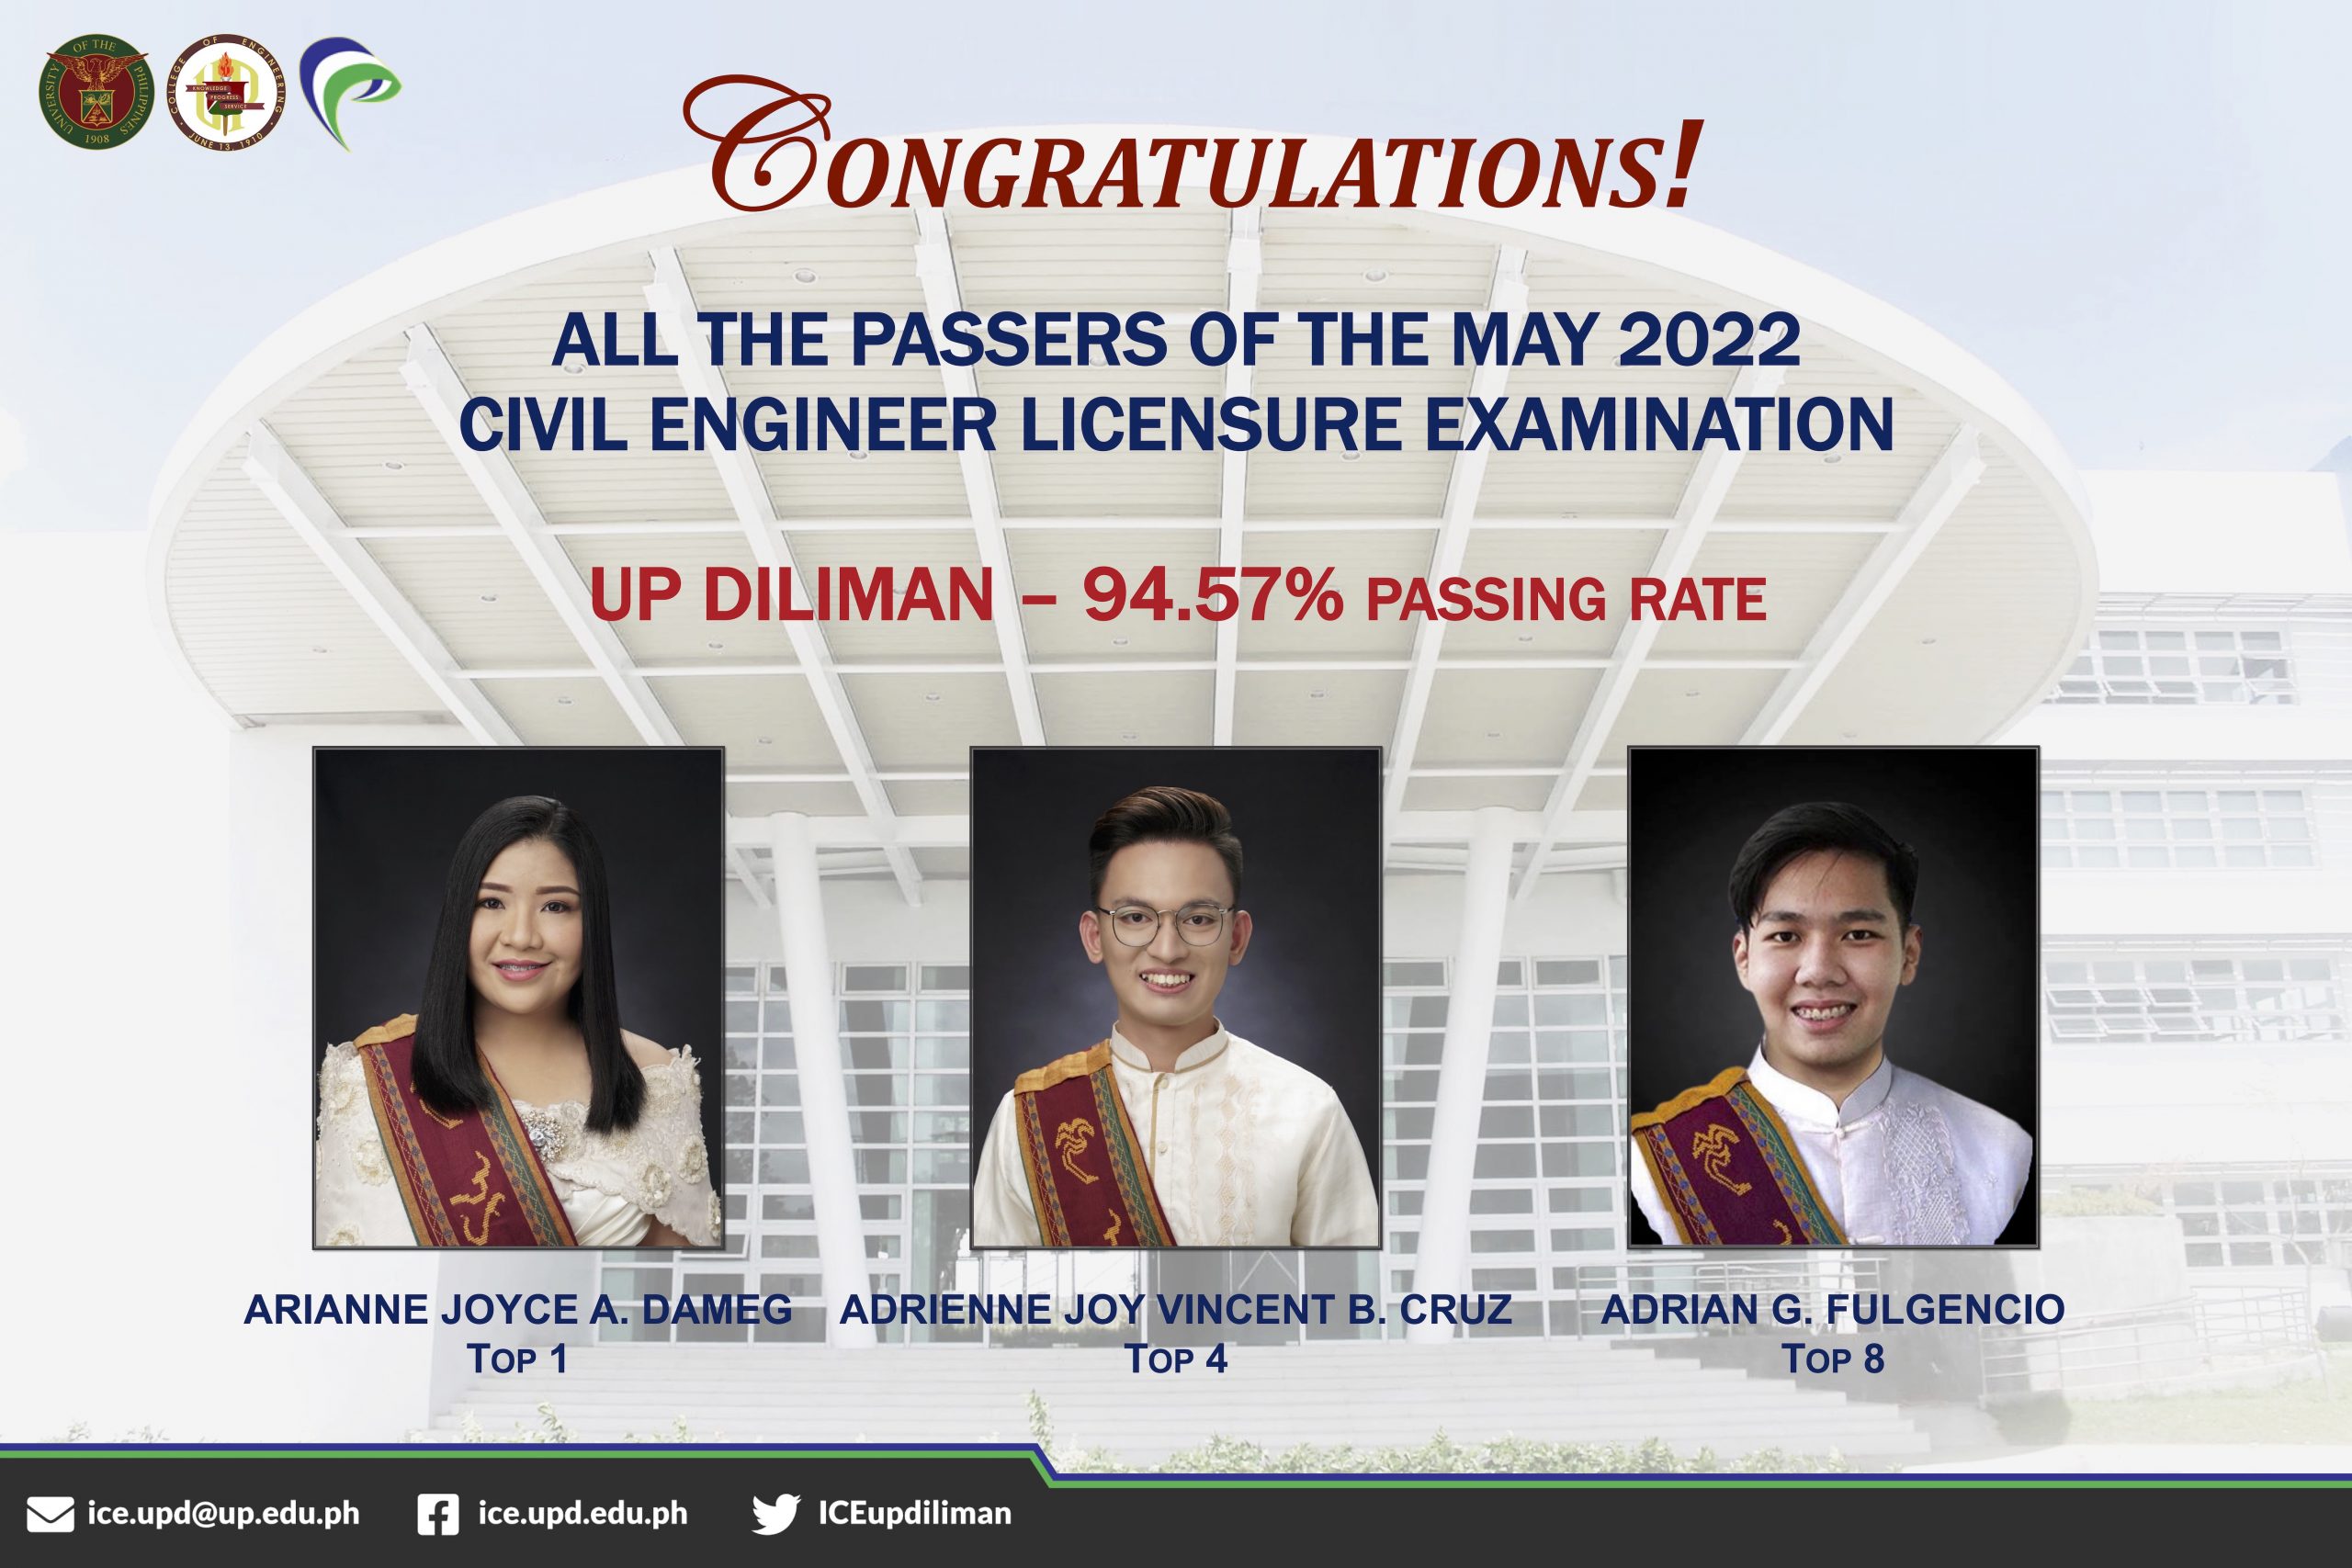 UP Diliman tops the May 2022 Civil Engineer Licensure Examination